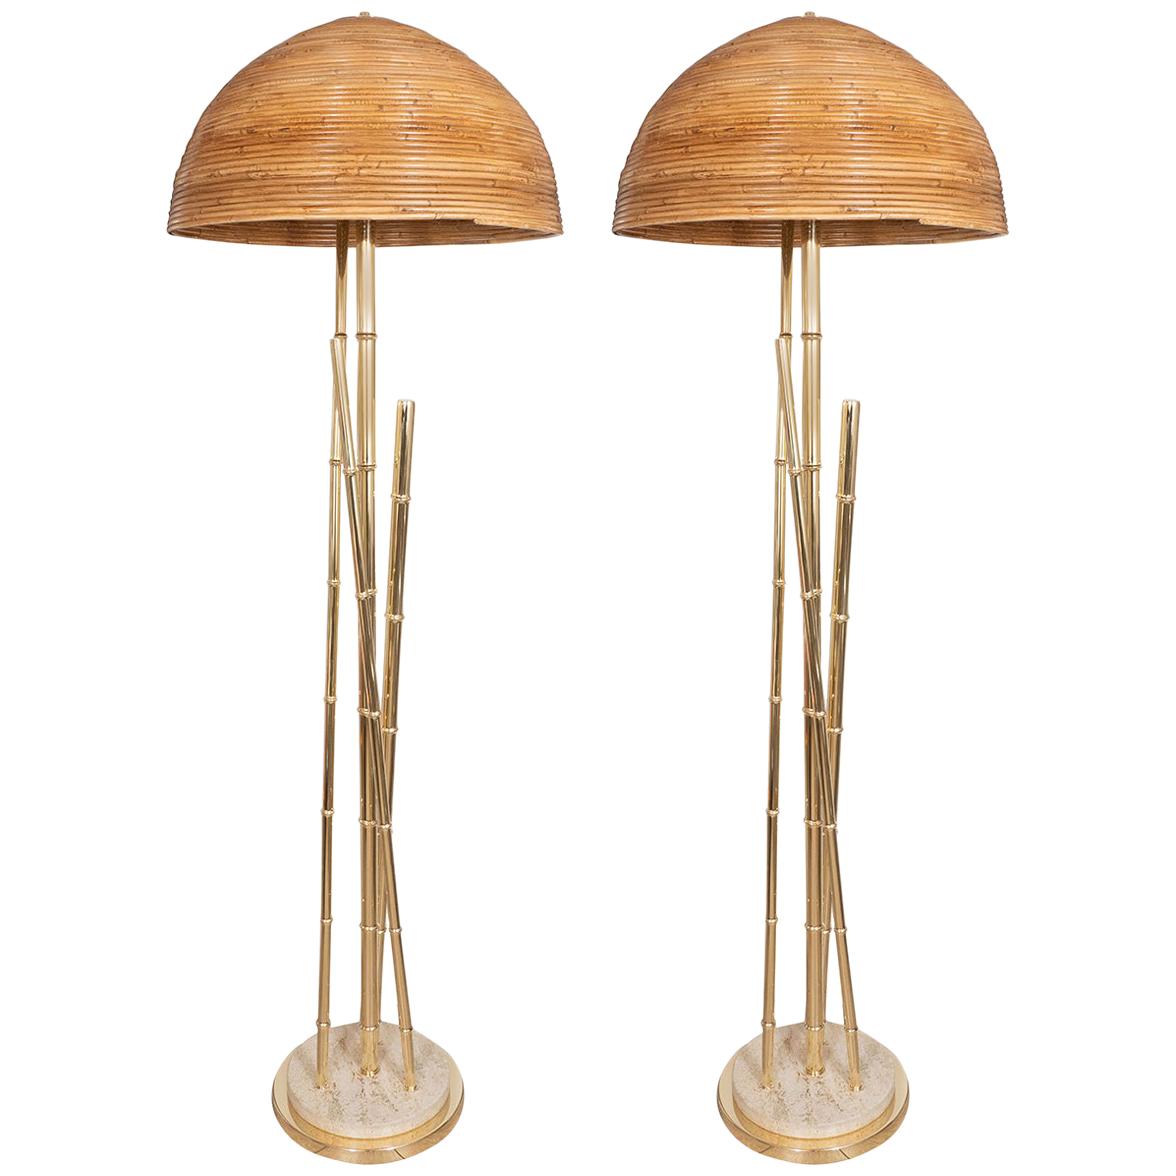 Pair of Bamboo Motif Floor Lamps For Sale